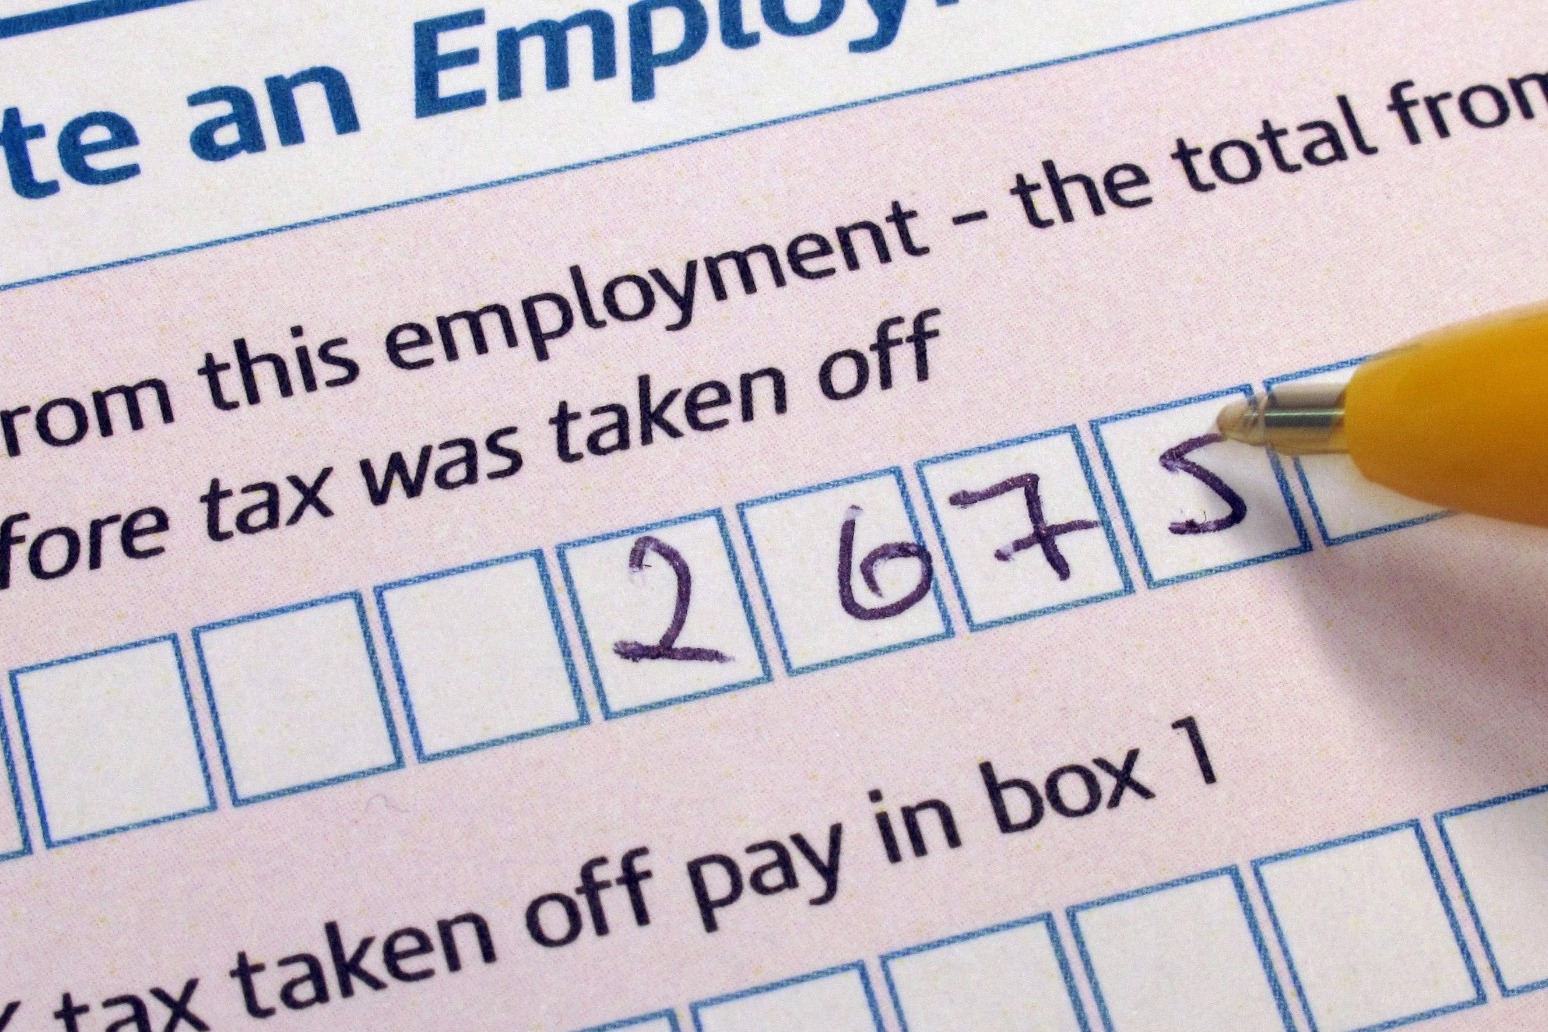 4,757 ‘festive filers’ submitted tax returns on Christmas Day 